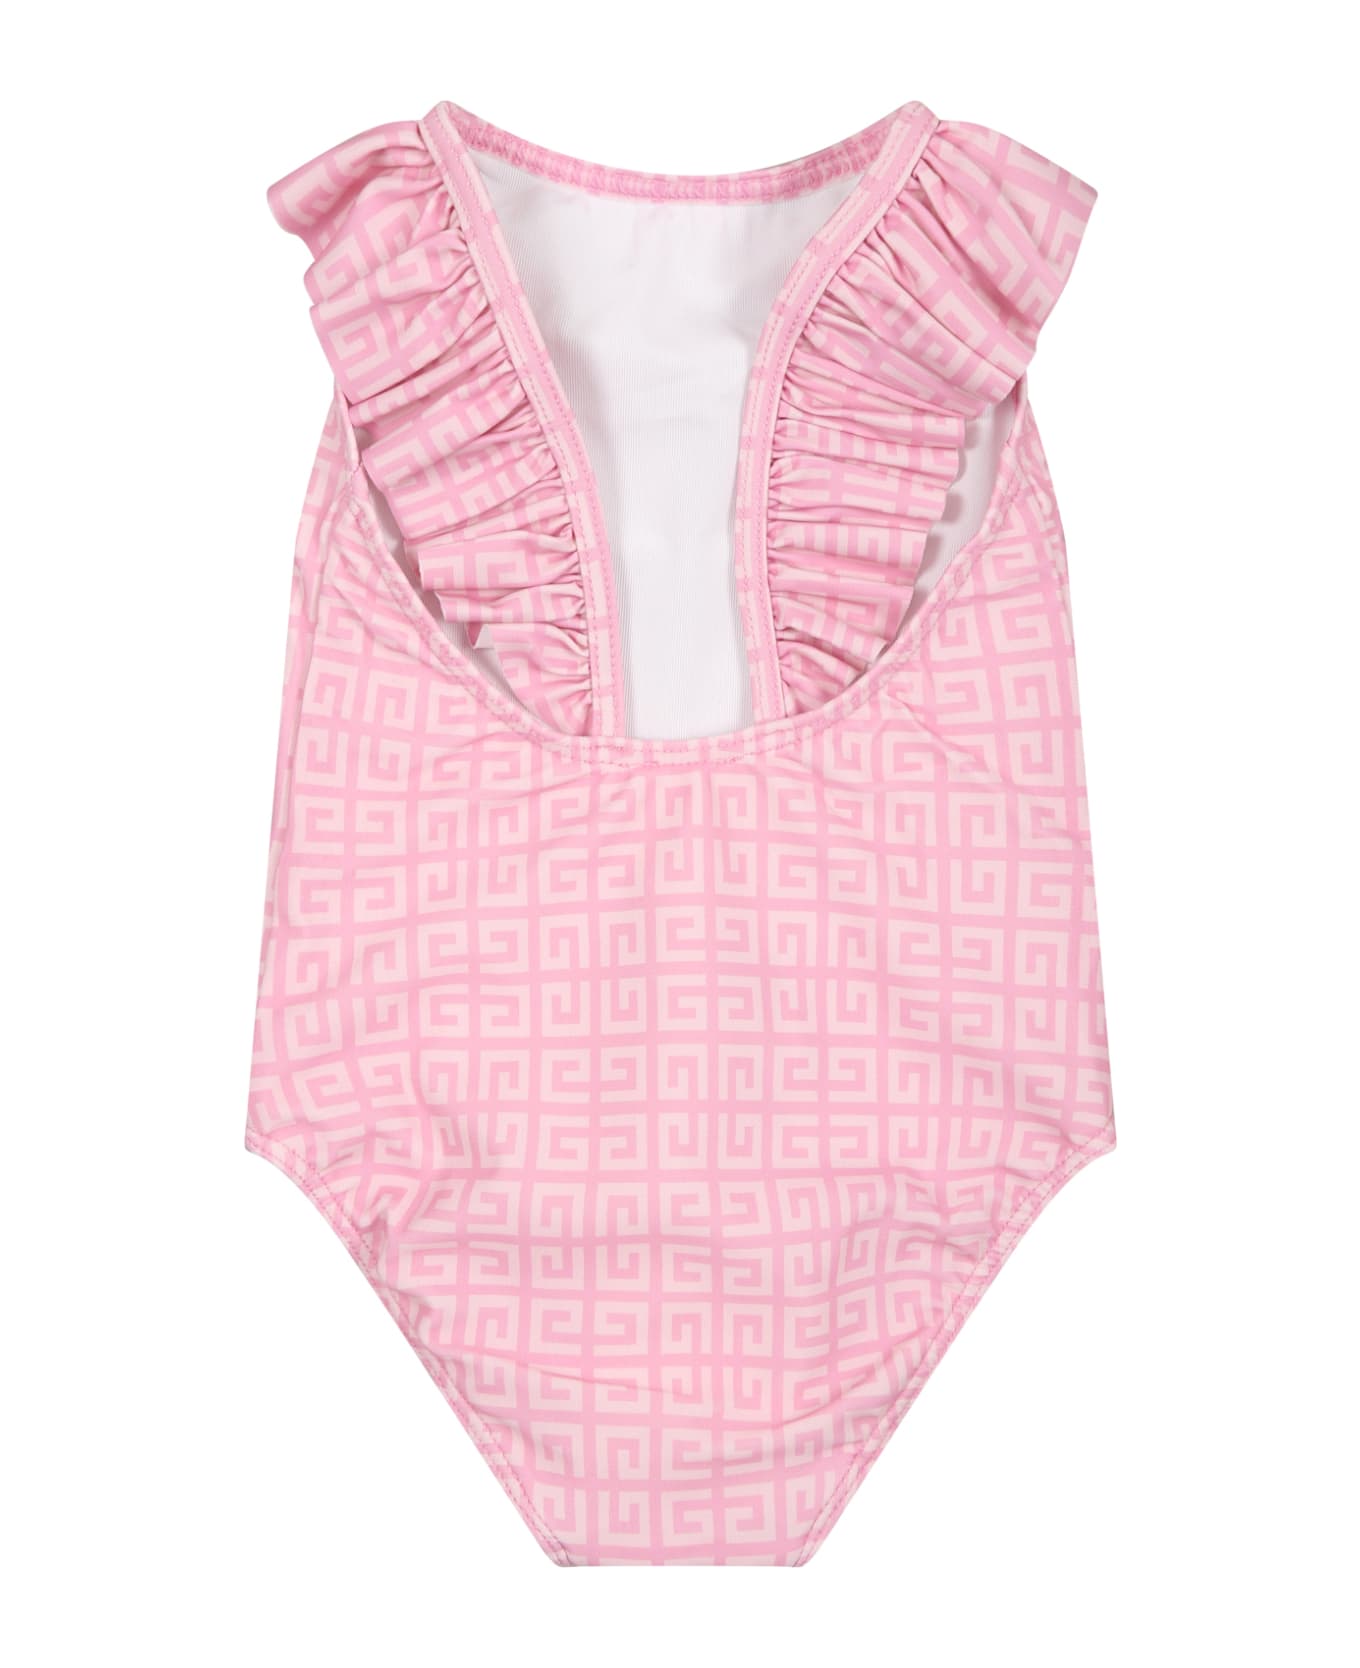 Givenchy Pink Swimsuit For Baby Girl With All-over Iconic Monogram - Pink